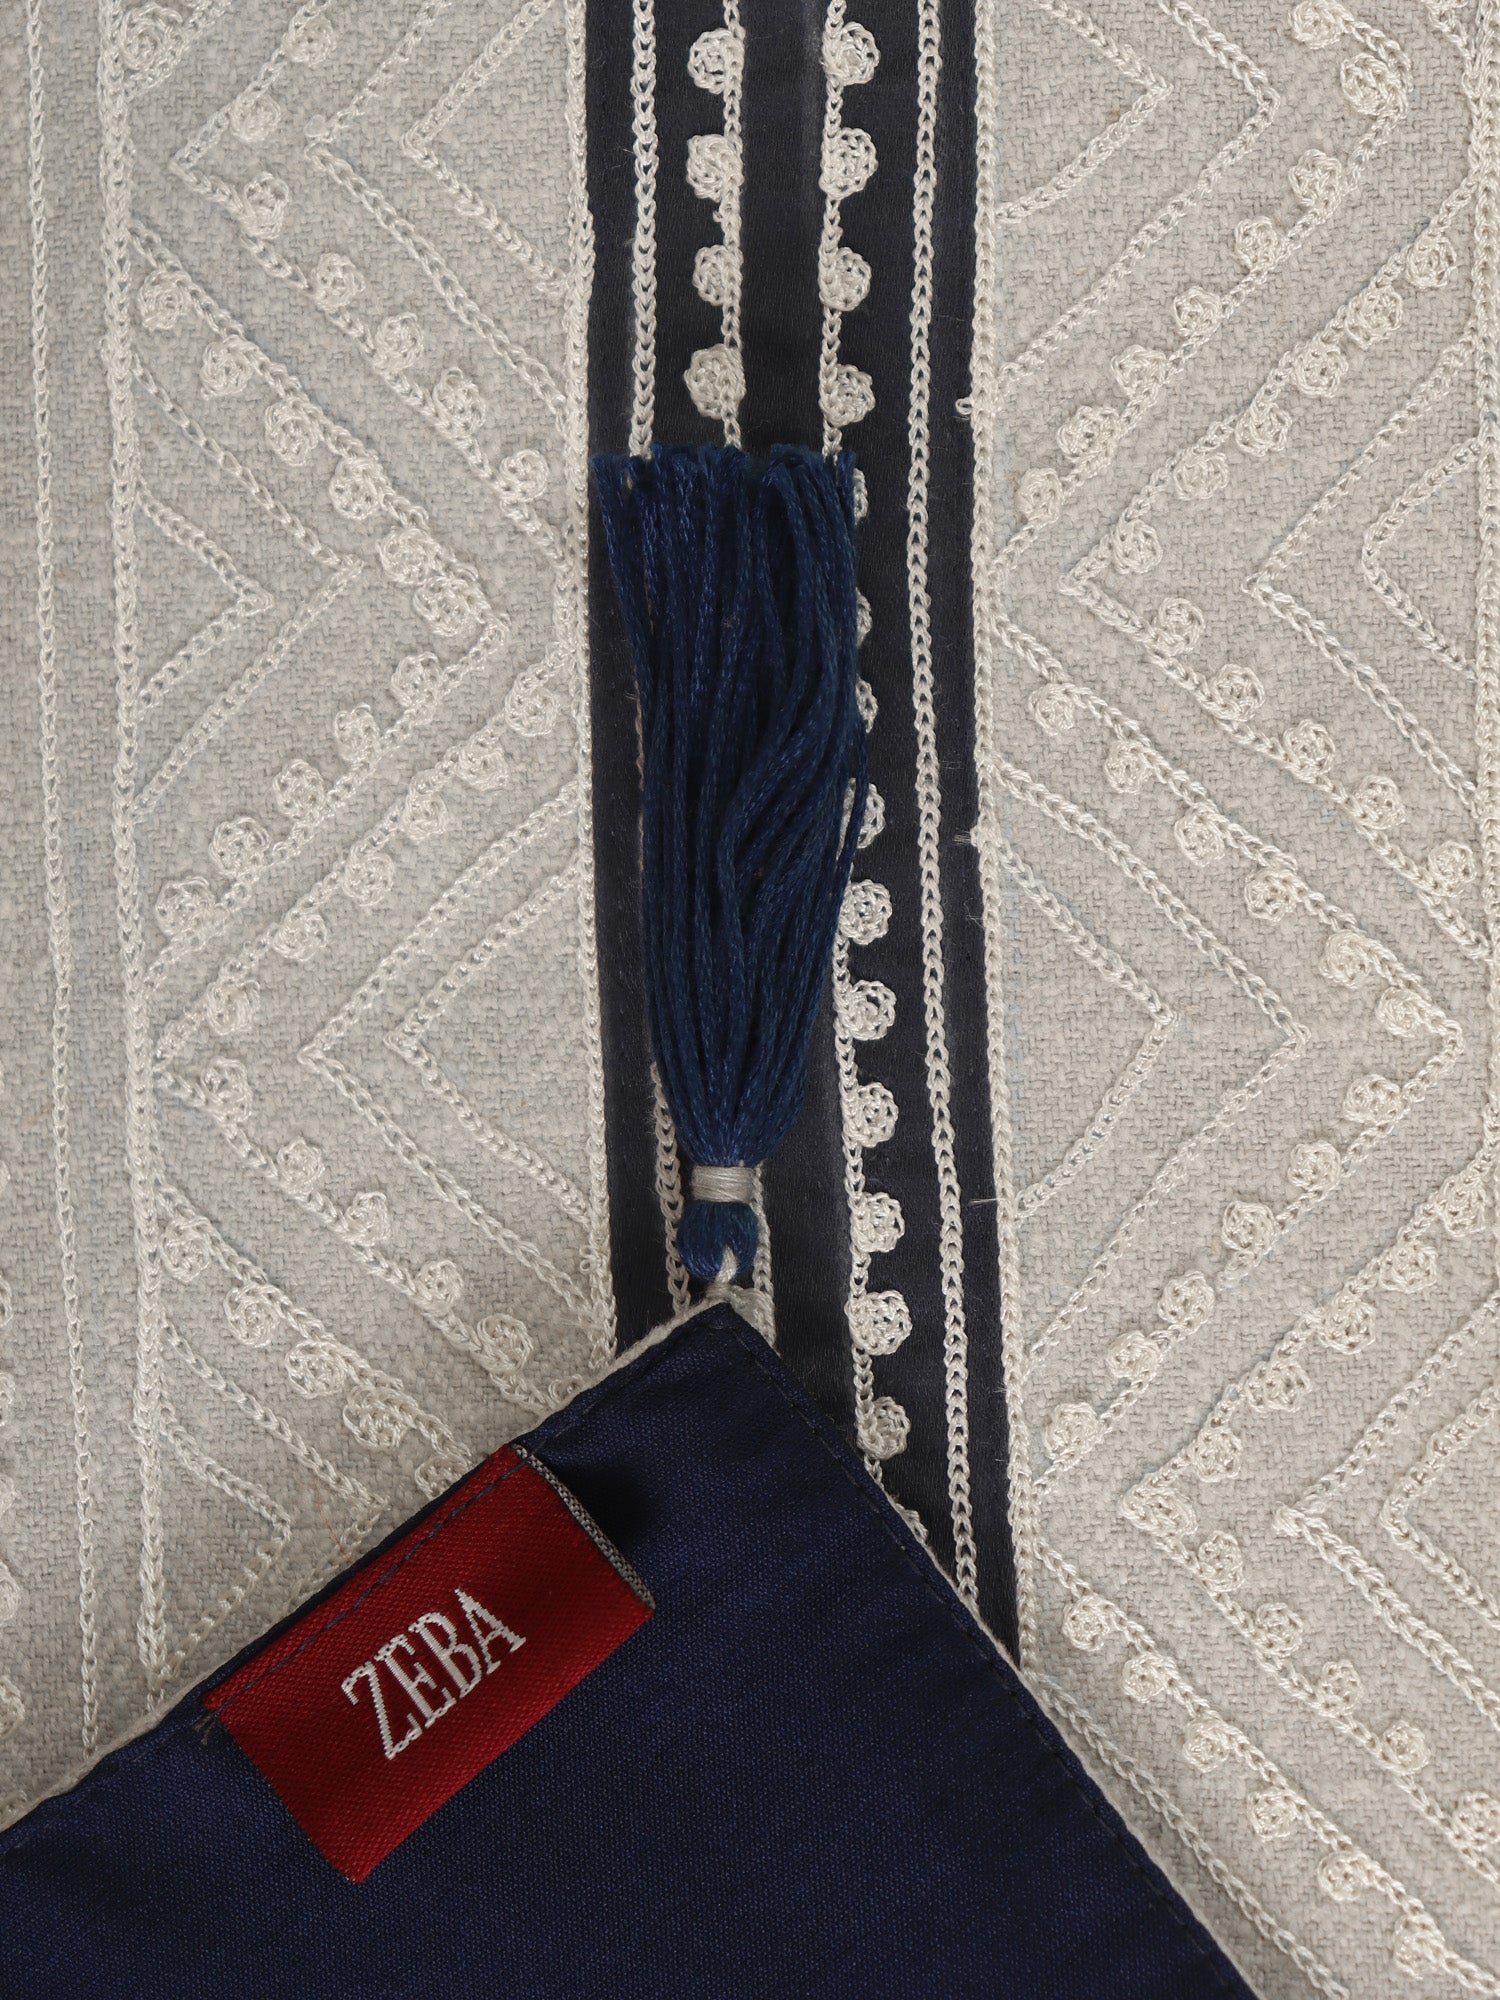 closeup embroidery on table runner with tassels - 52x84 inches.